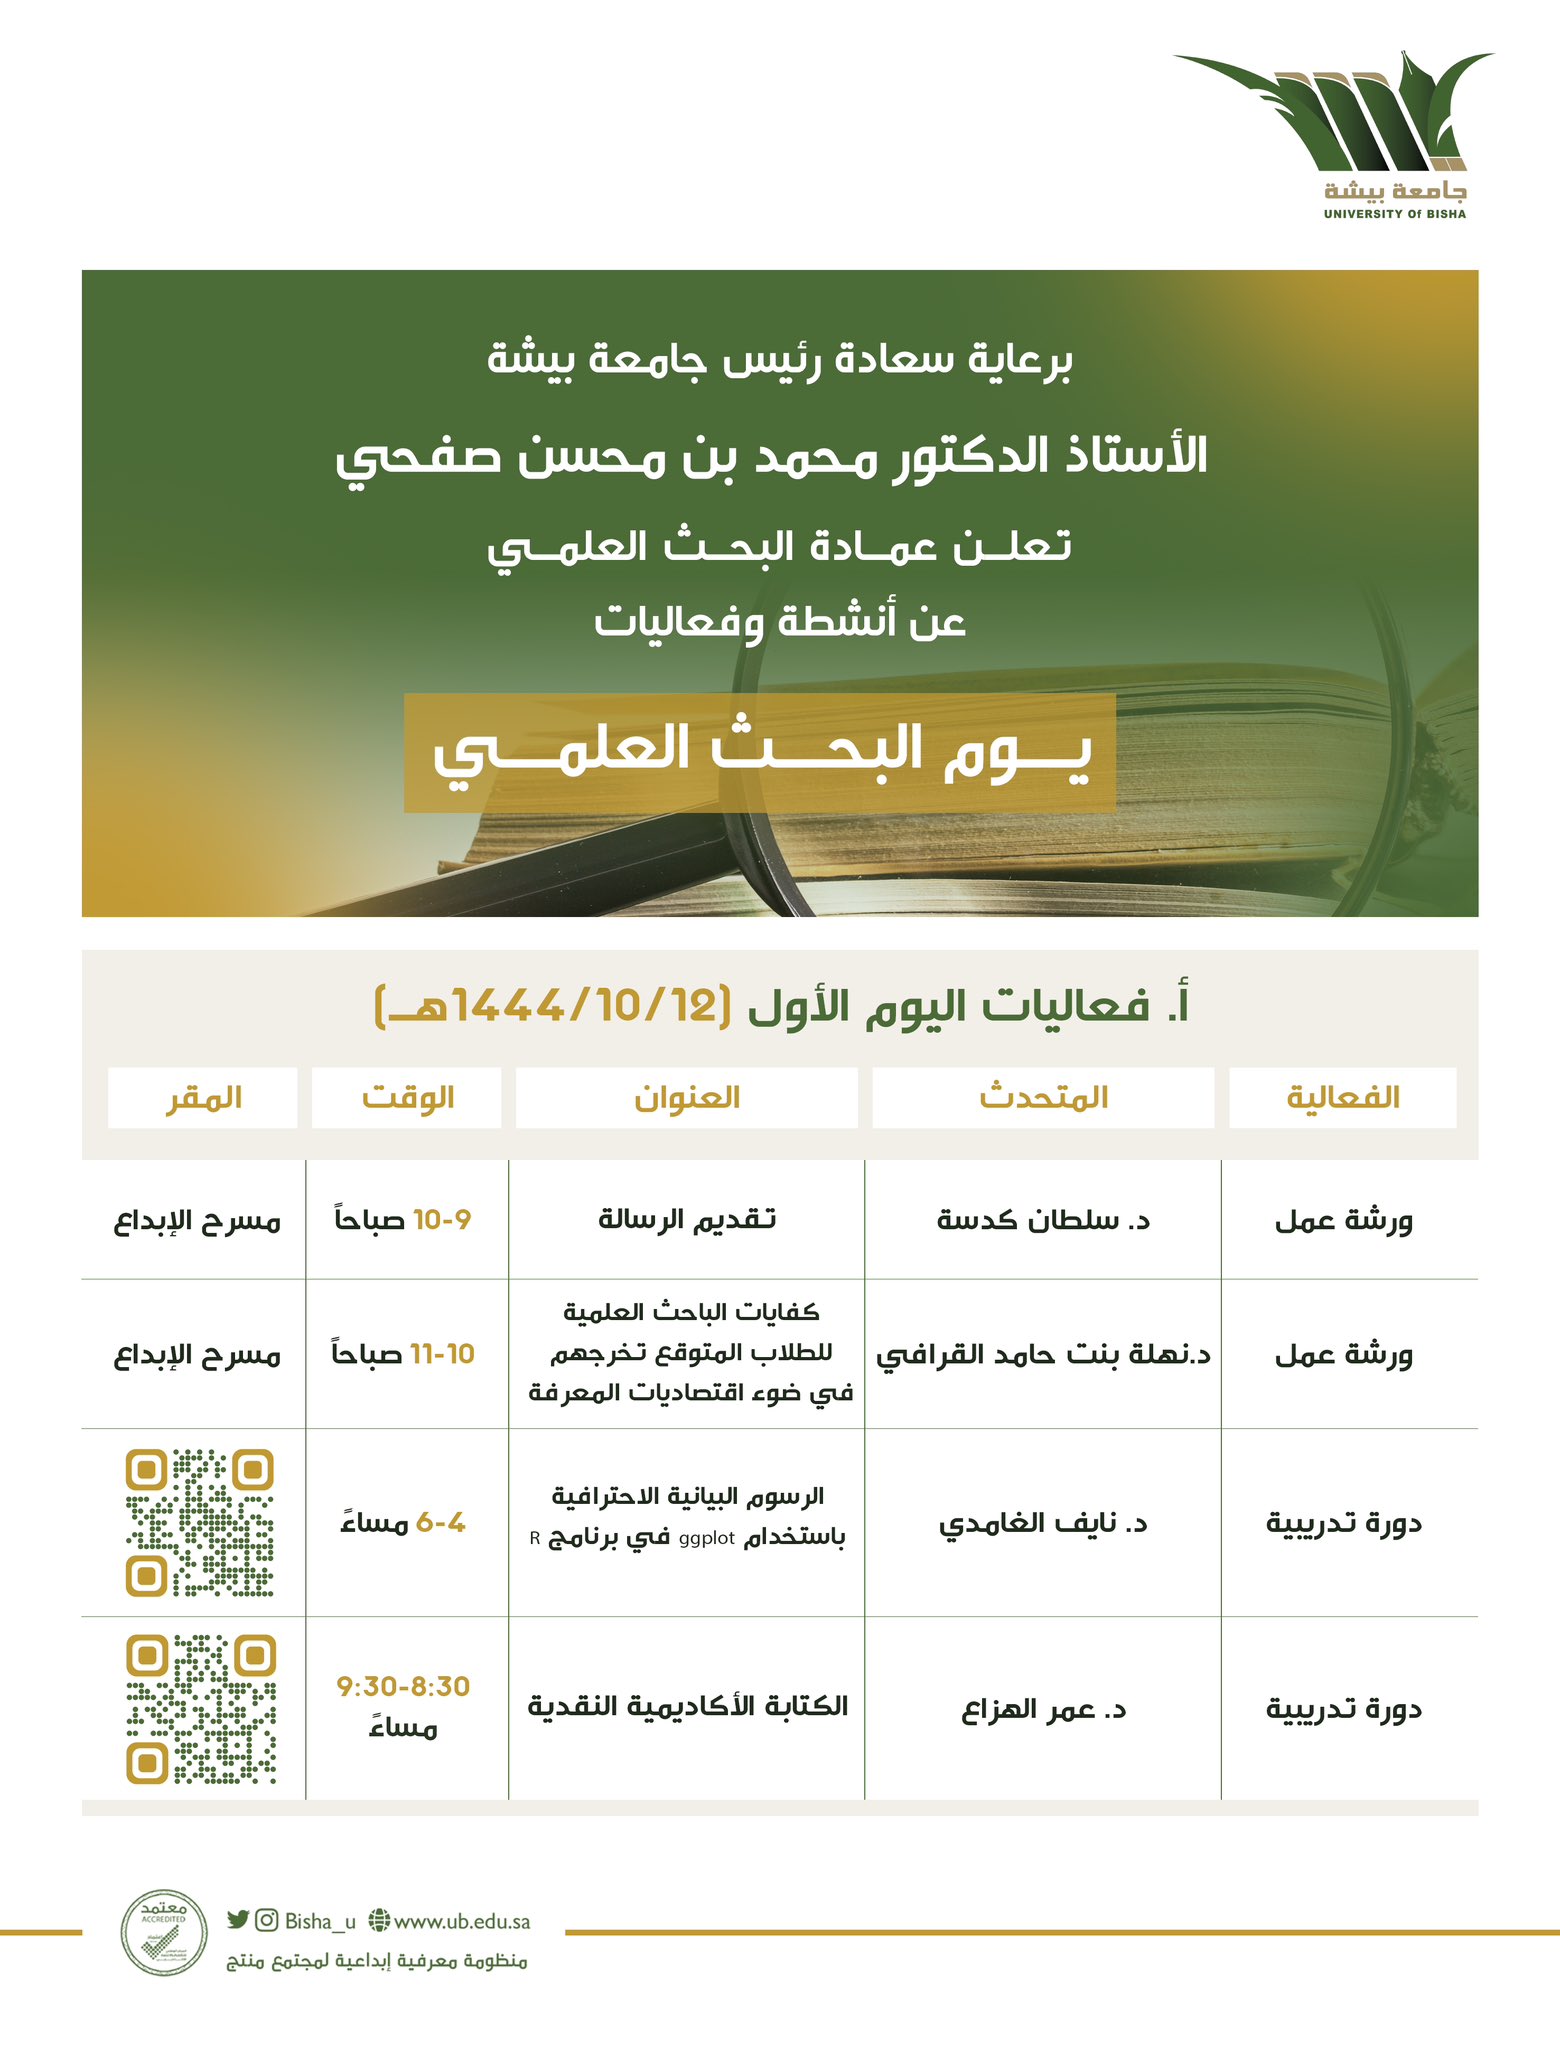 The Deanship of Scientific Research invites you to attend Scientific Research Day Activities of the first day (Tuesday - 10/12/144​4 AH)